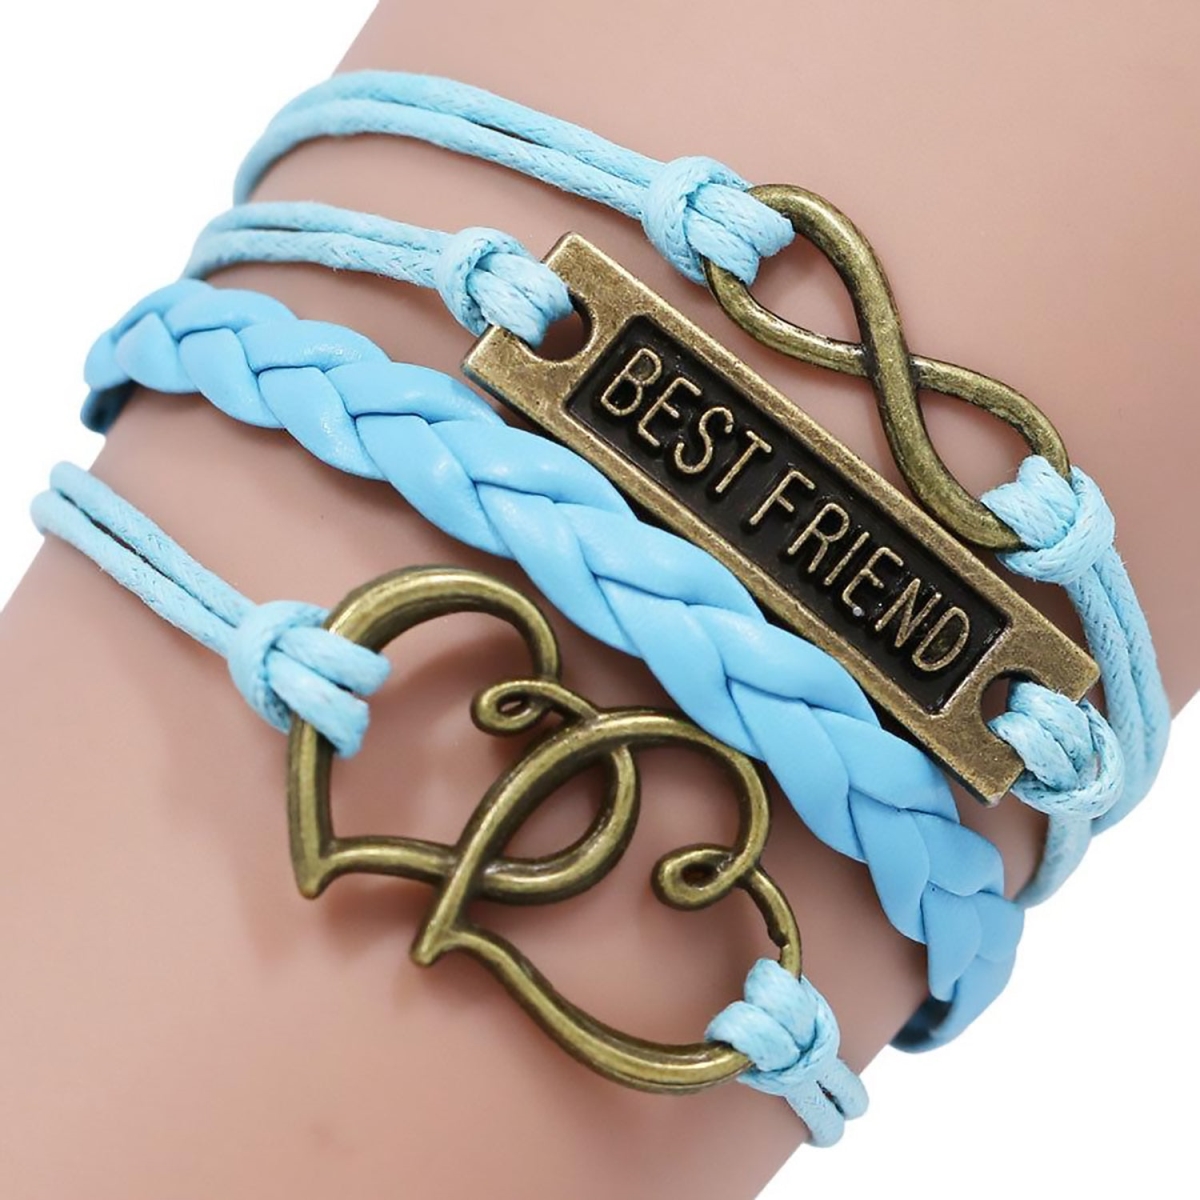 Picture of Adore 30386630 Braided Infinity Heart Best Friend Bracelet, Blue